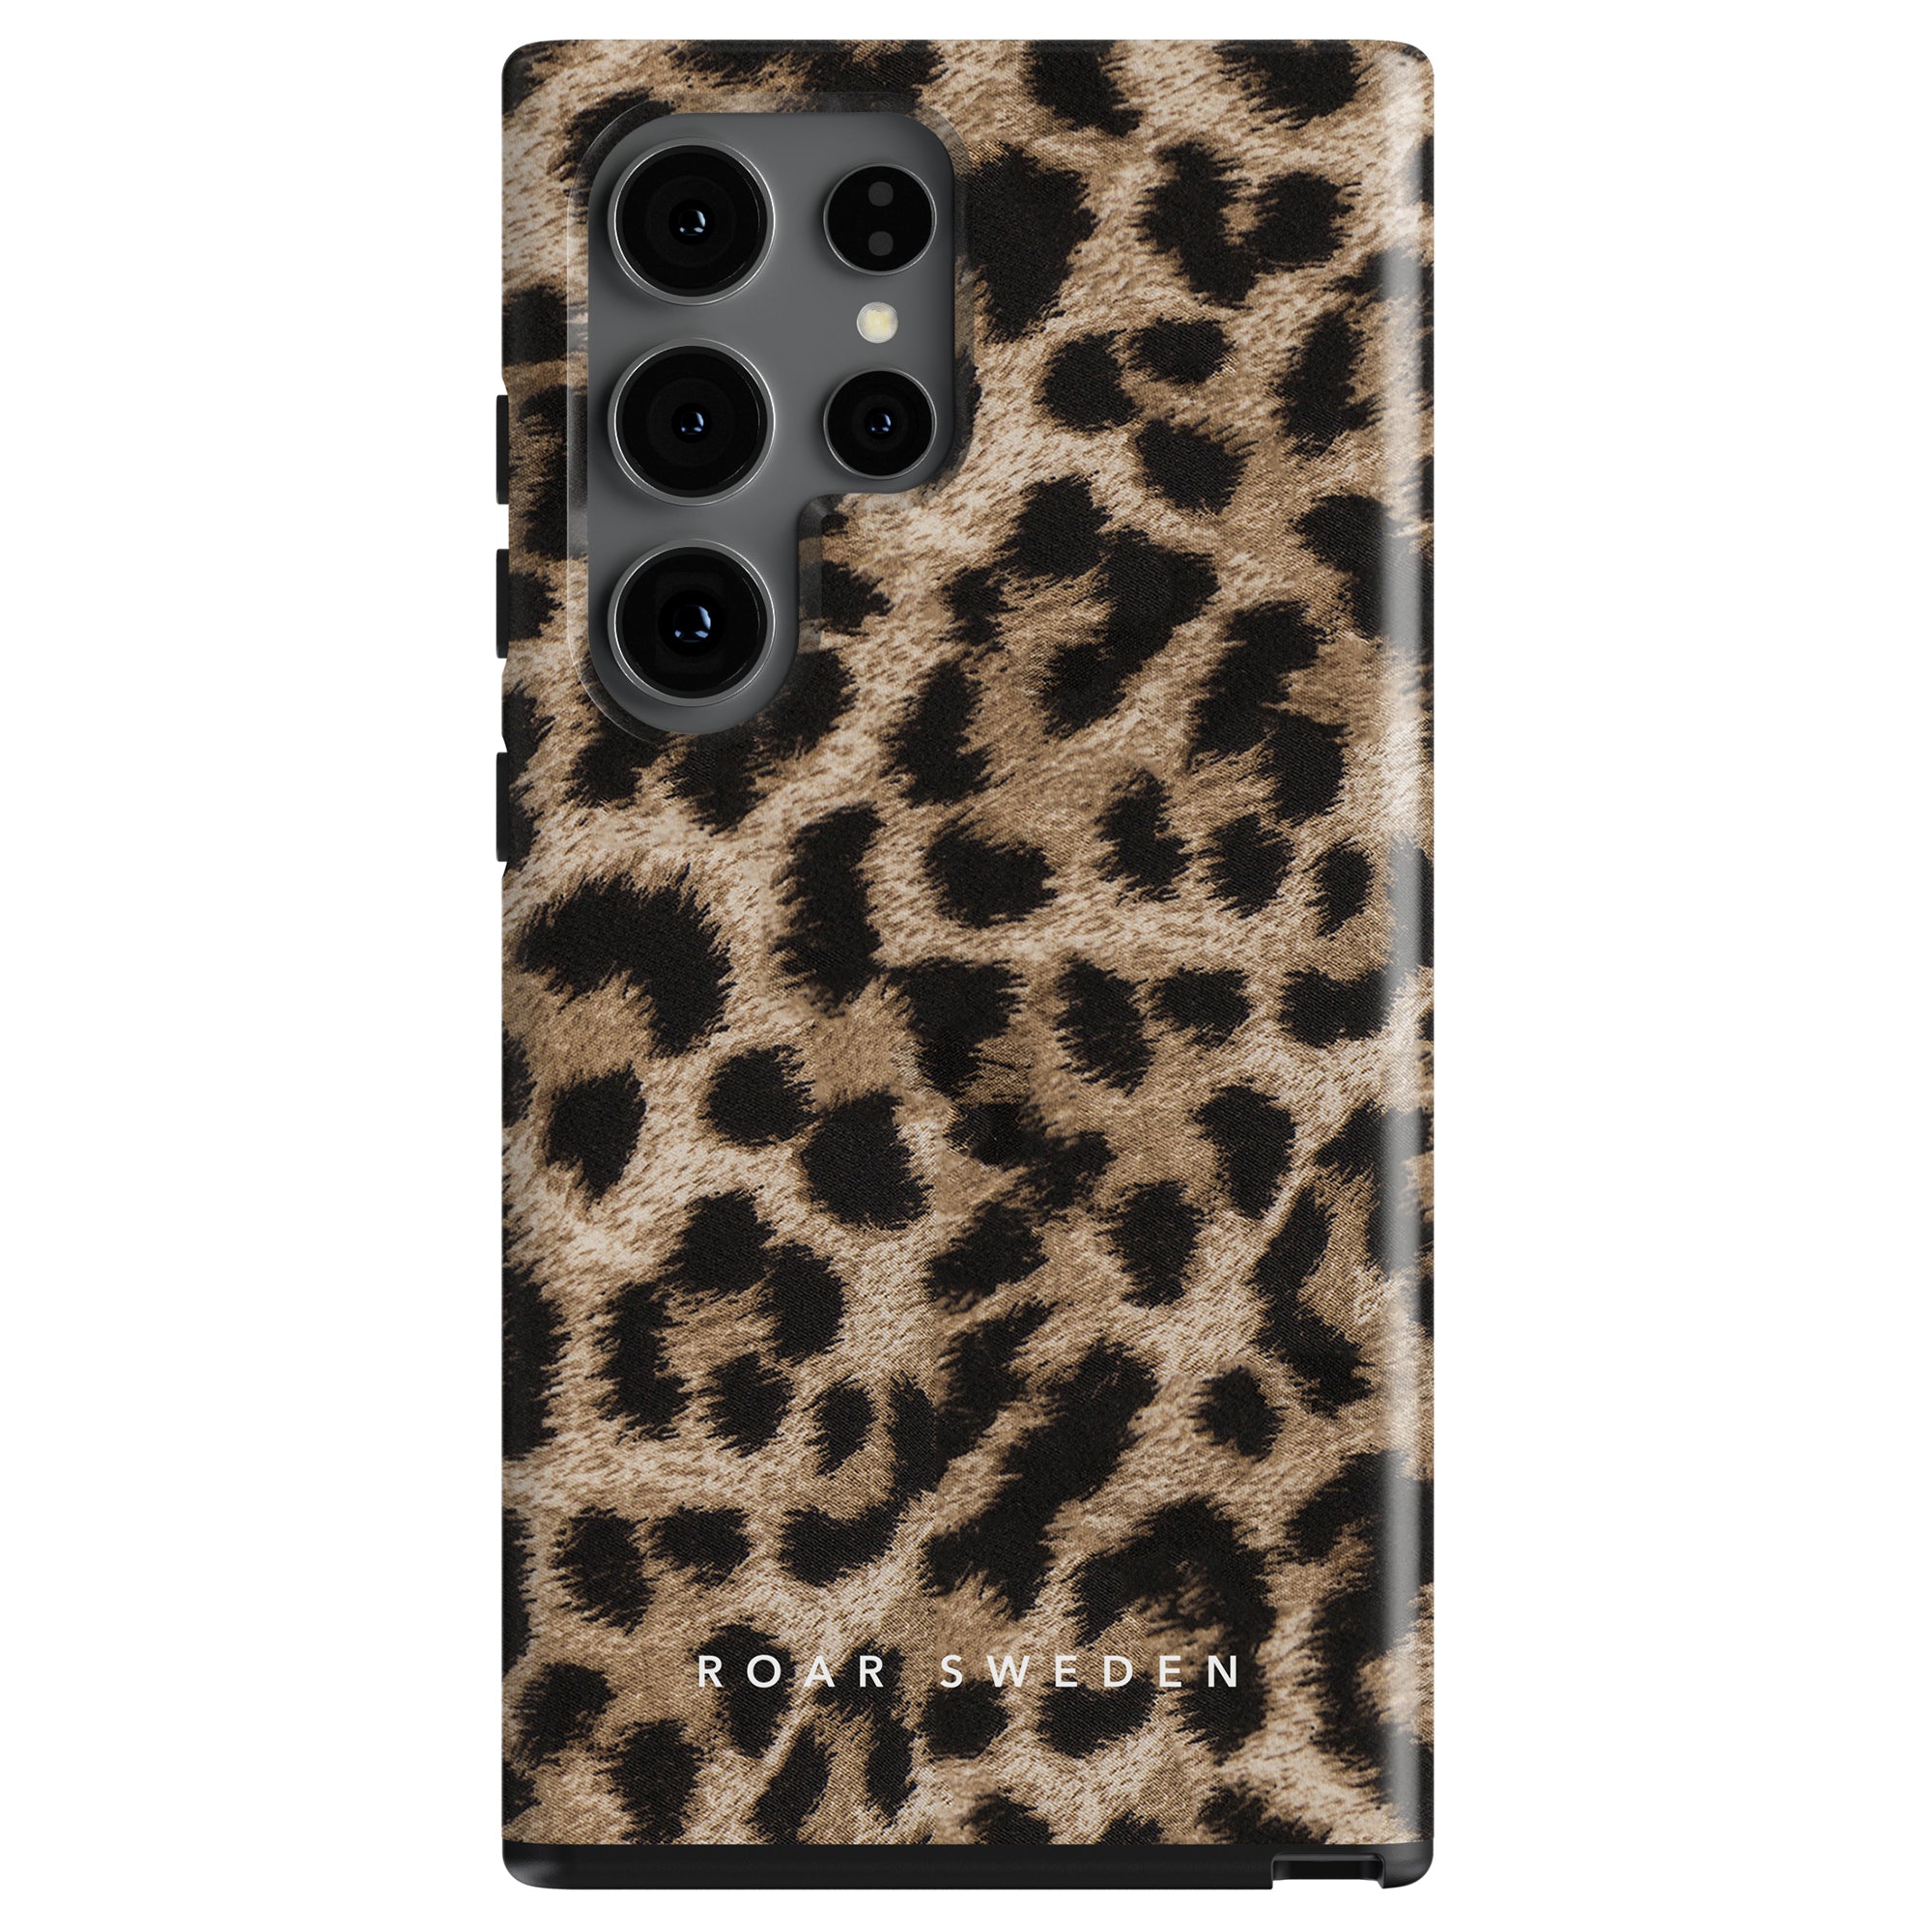 A smartphone with a Leopard - Tough case design and a triple-lens camera.